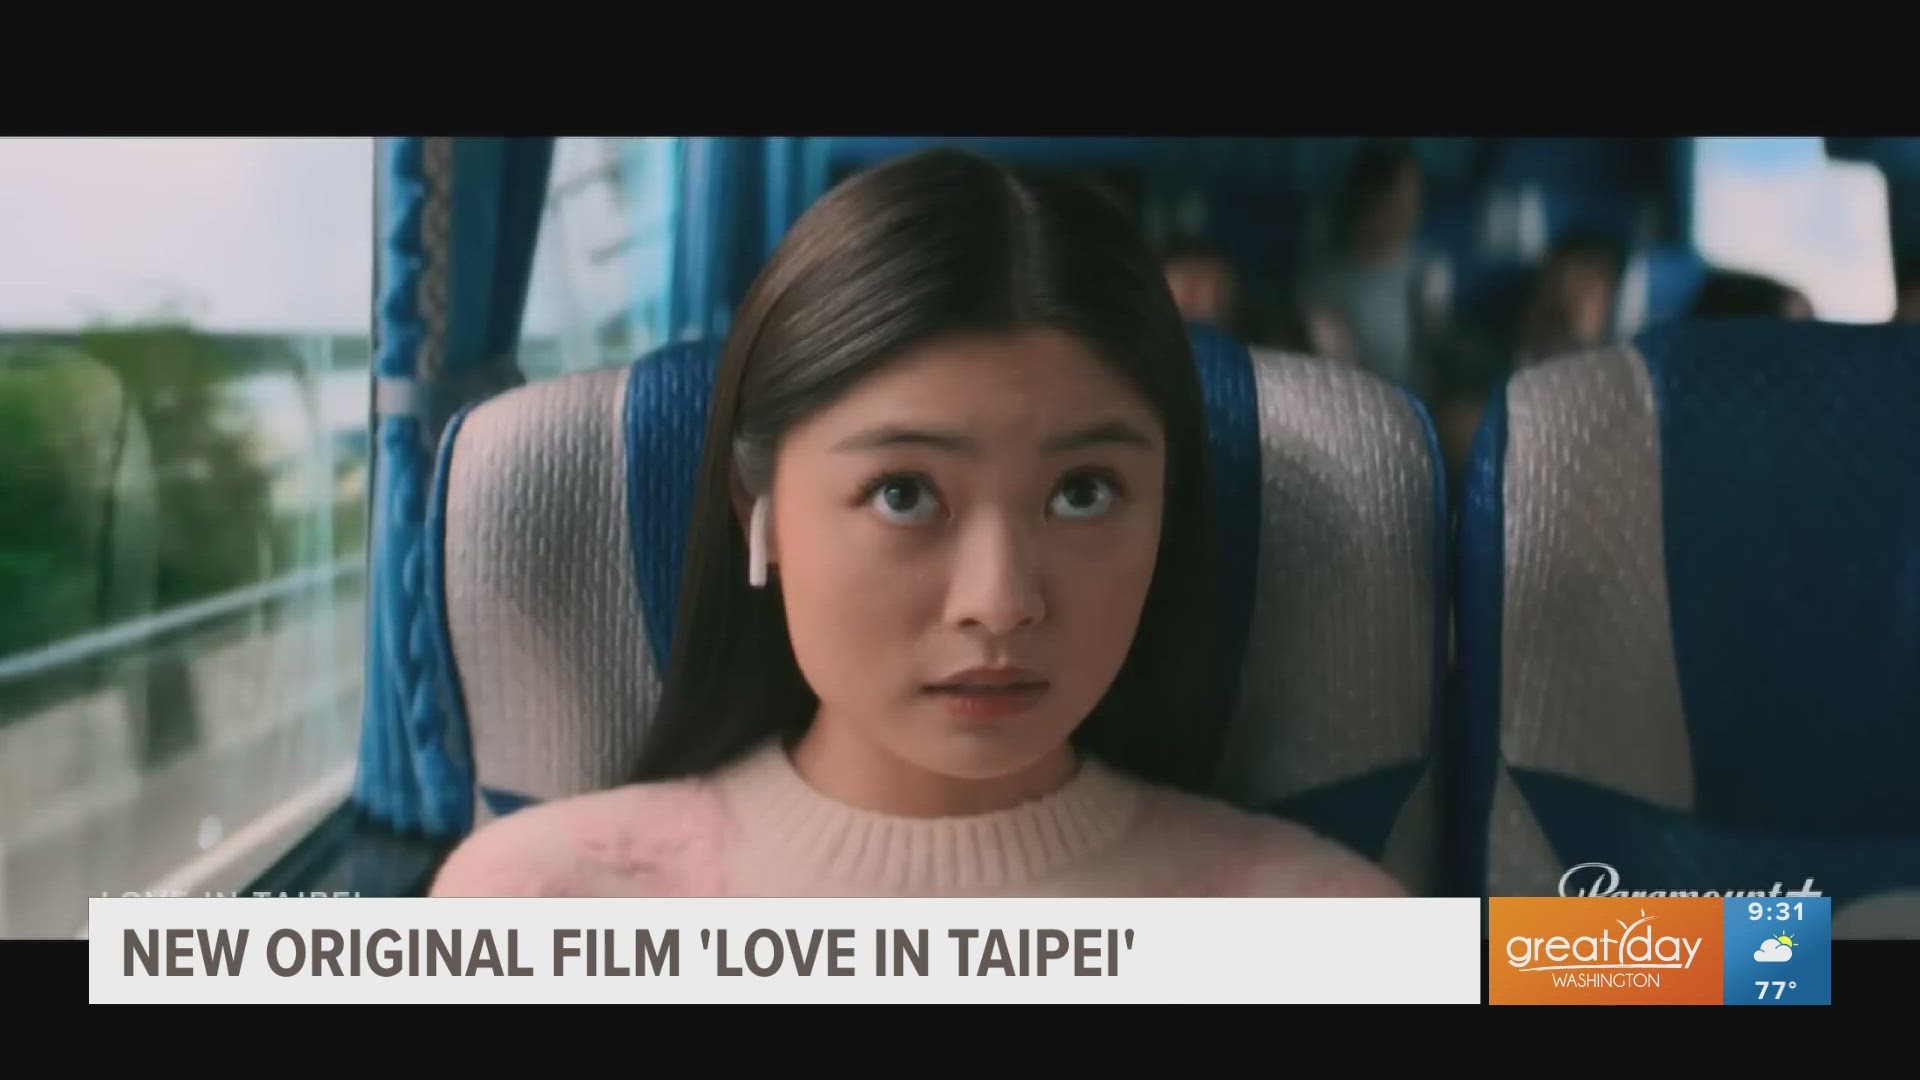 Director Arvin Chen and Author Abigail Hing Wen discuss Paramount+ film ‘Love in Taipei.’ ‘Love in Taipei’ is now streaming on Paramount+.